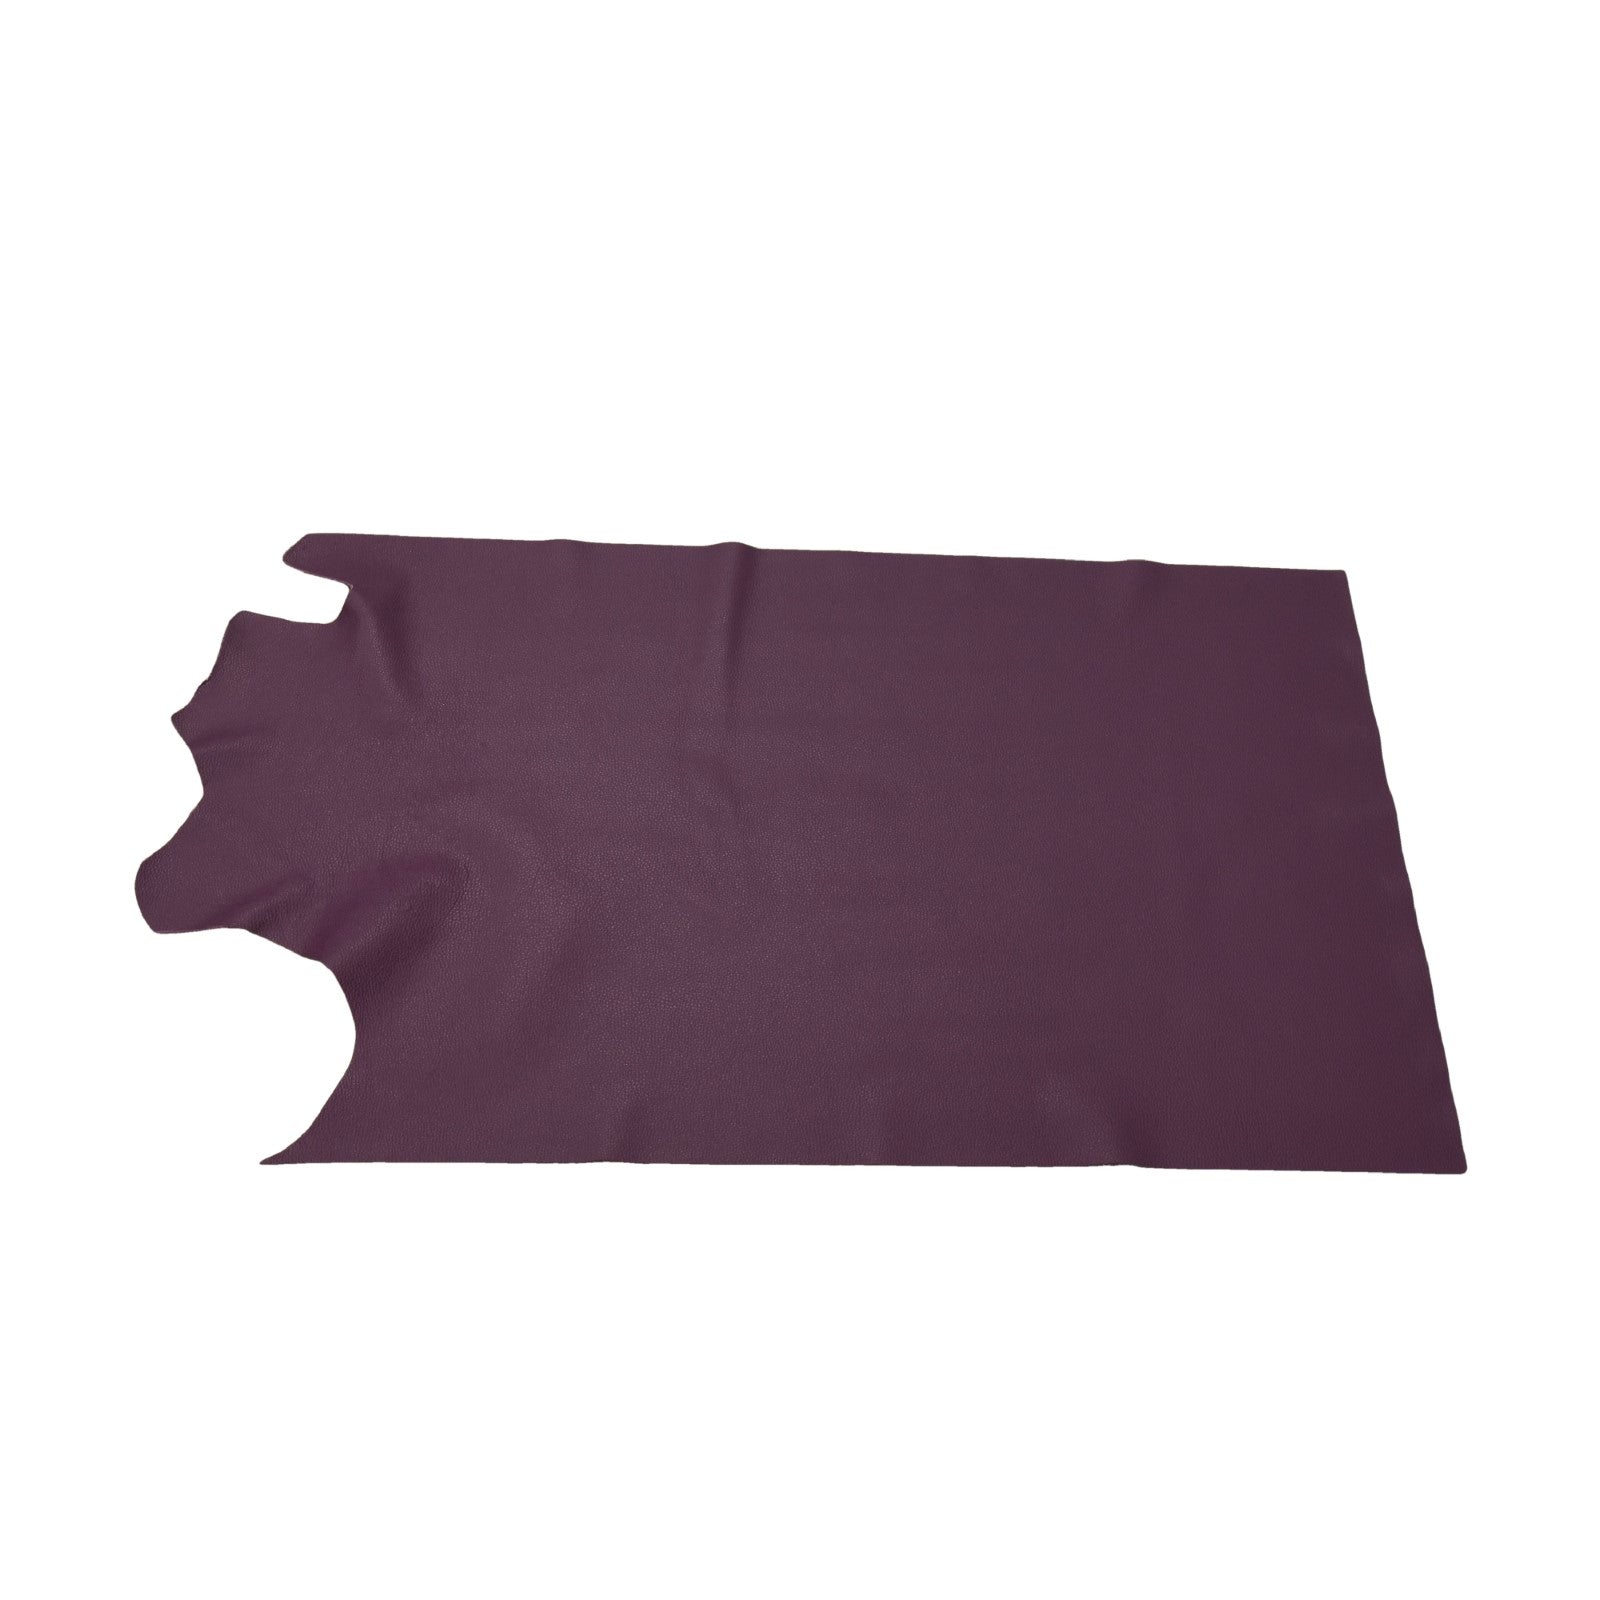 Napa Concord Grape, 3-4 oz Cow Hides, Tried n True, Middle PIece / 6.5-7.5 Square Foot | The Leather Guy